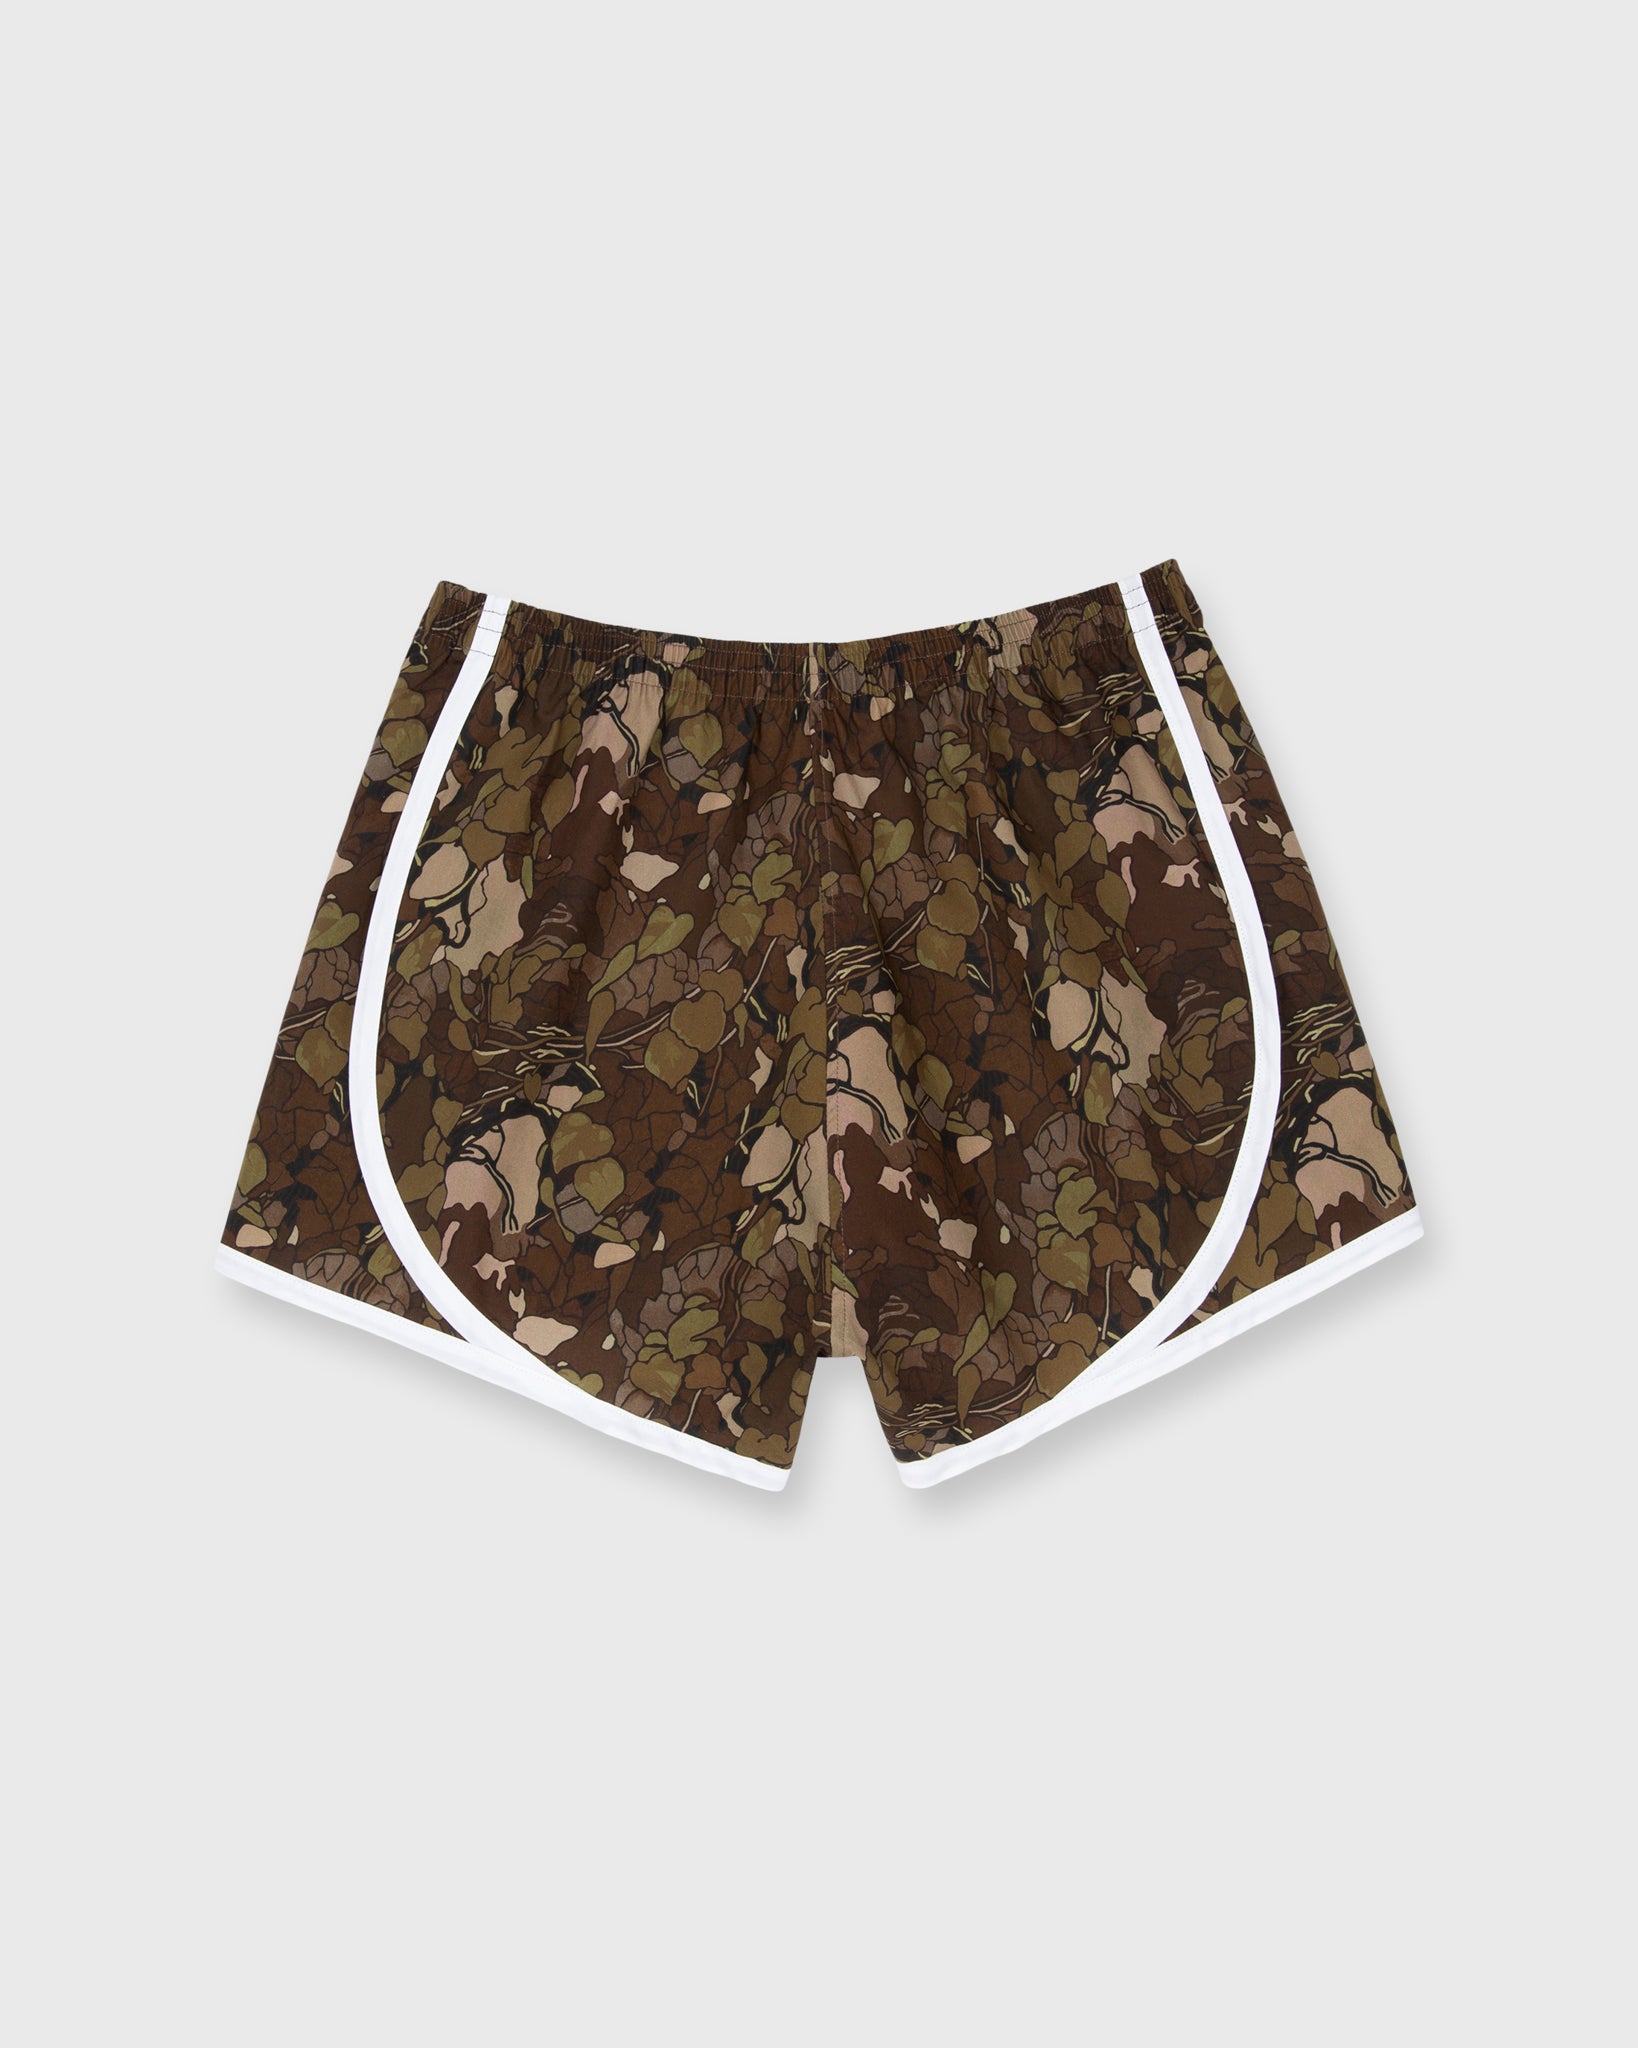 Track Short in Green/Brown Ivy Vine Liberty Fabric